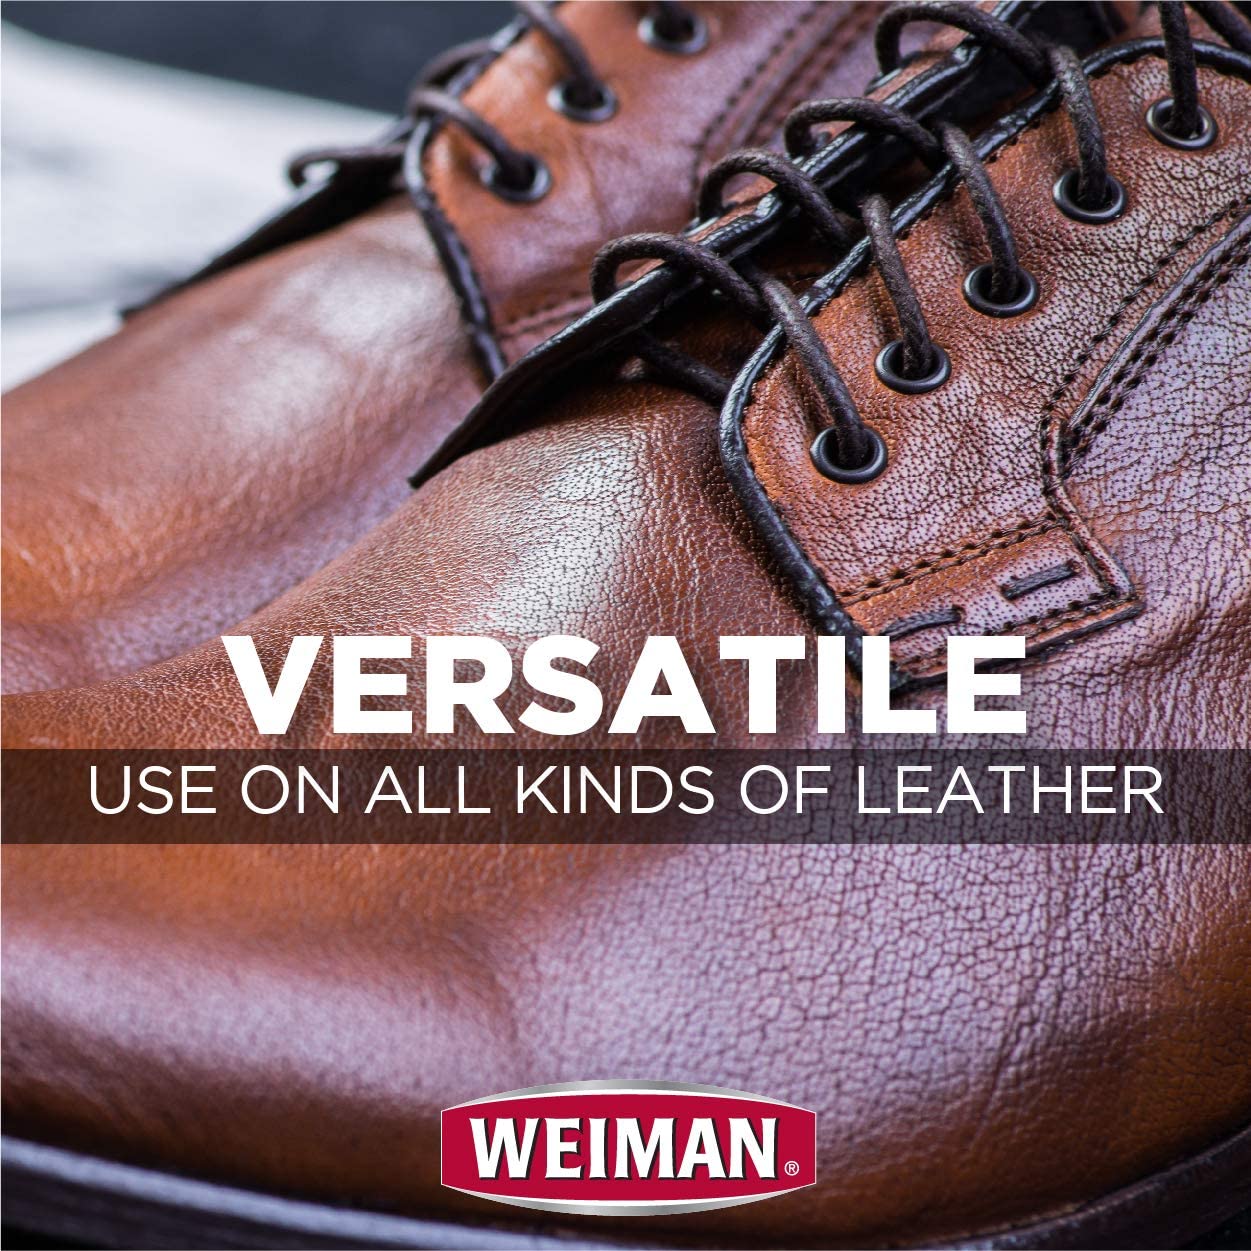 Weiman Leather Cleaner & Conditioner 355/473 ML